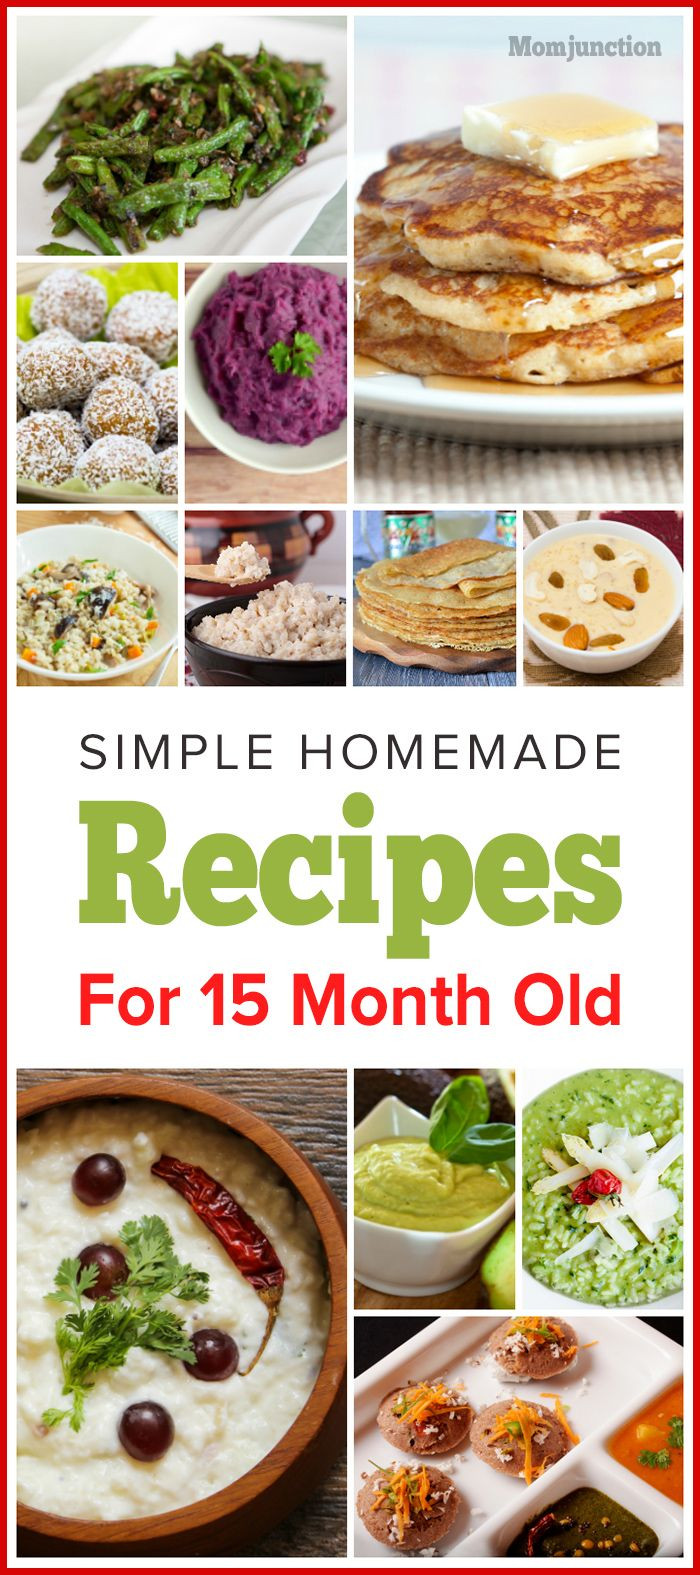 Baby Food Recipes 12 Months
 Healthy And Interesting Food Ideas For 15 Month Olds